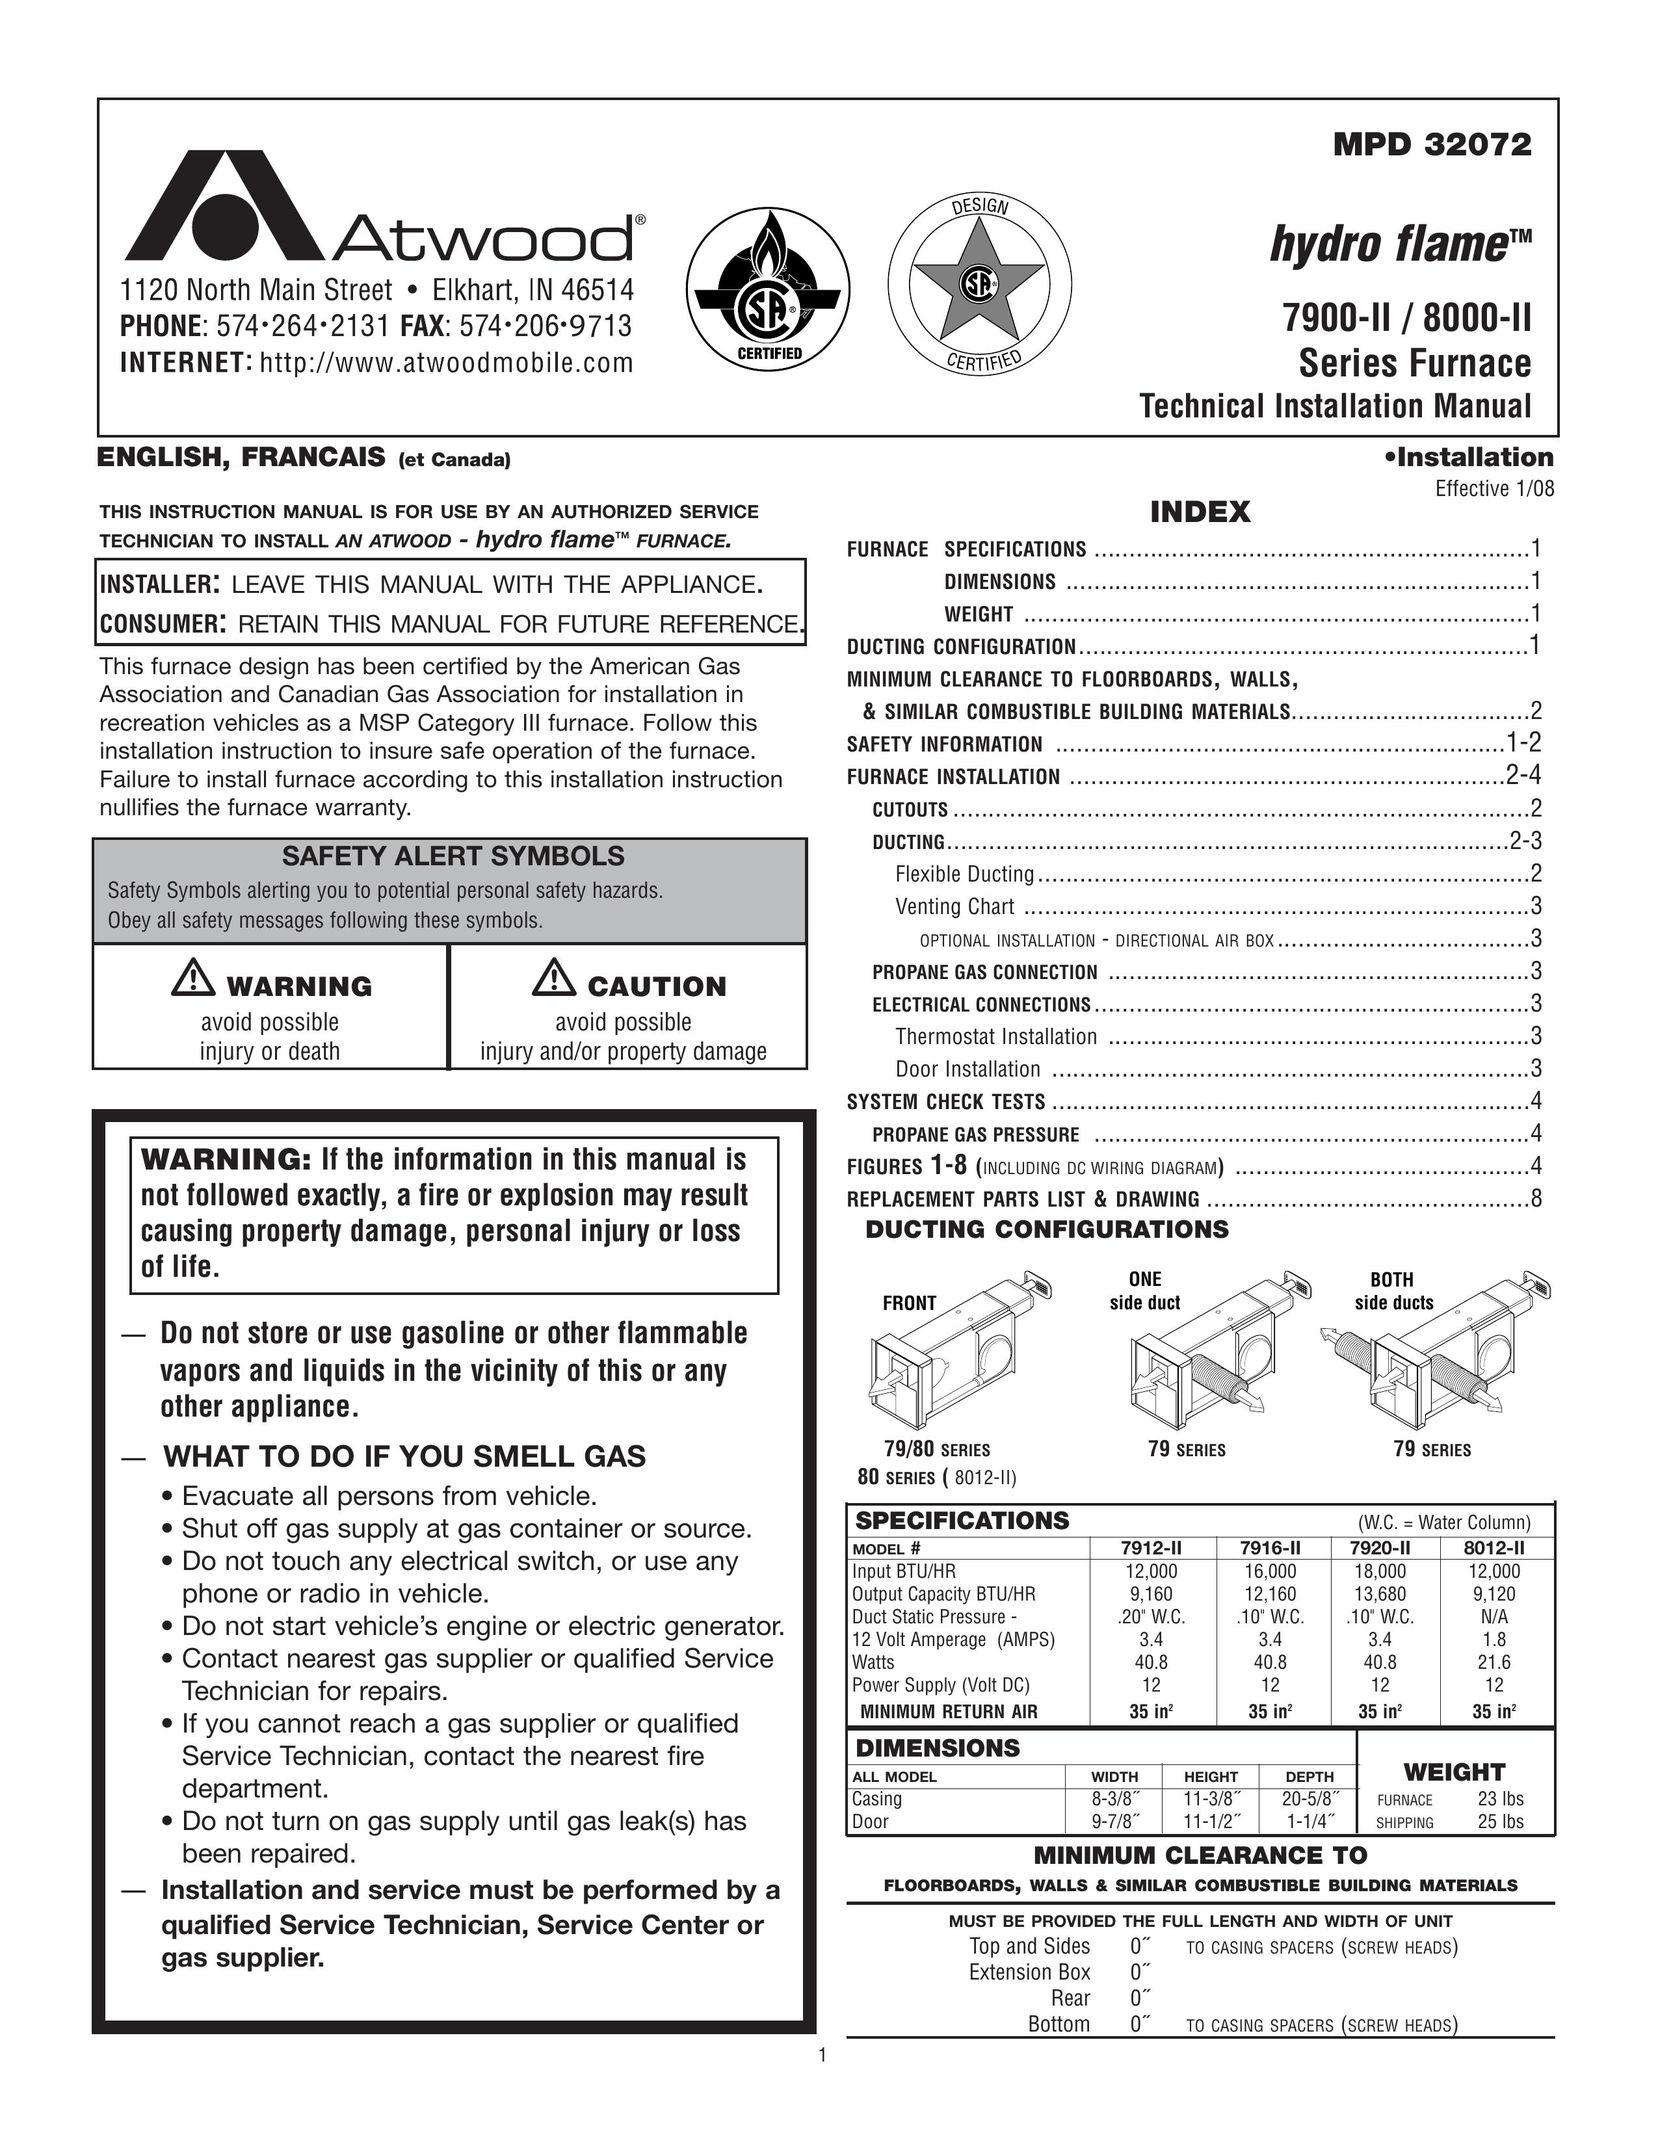 Atwood Mobile Products 8012-II Furnace User Manual